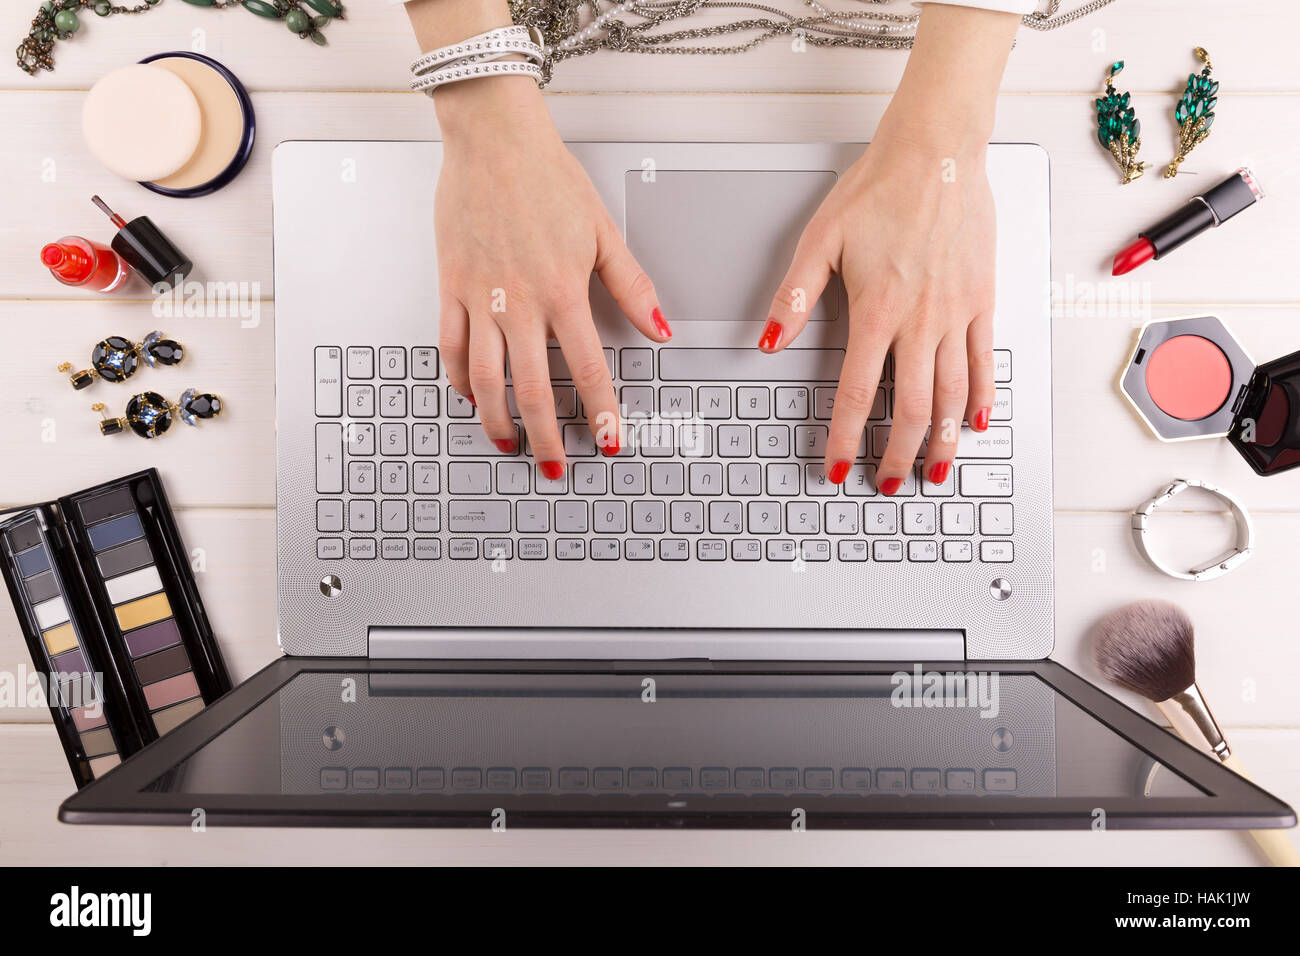 fashion blogger concept - woman with red polished nails working on laptop Stock Photo